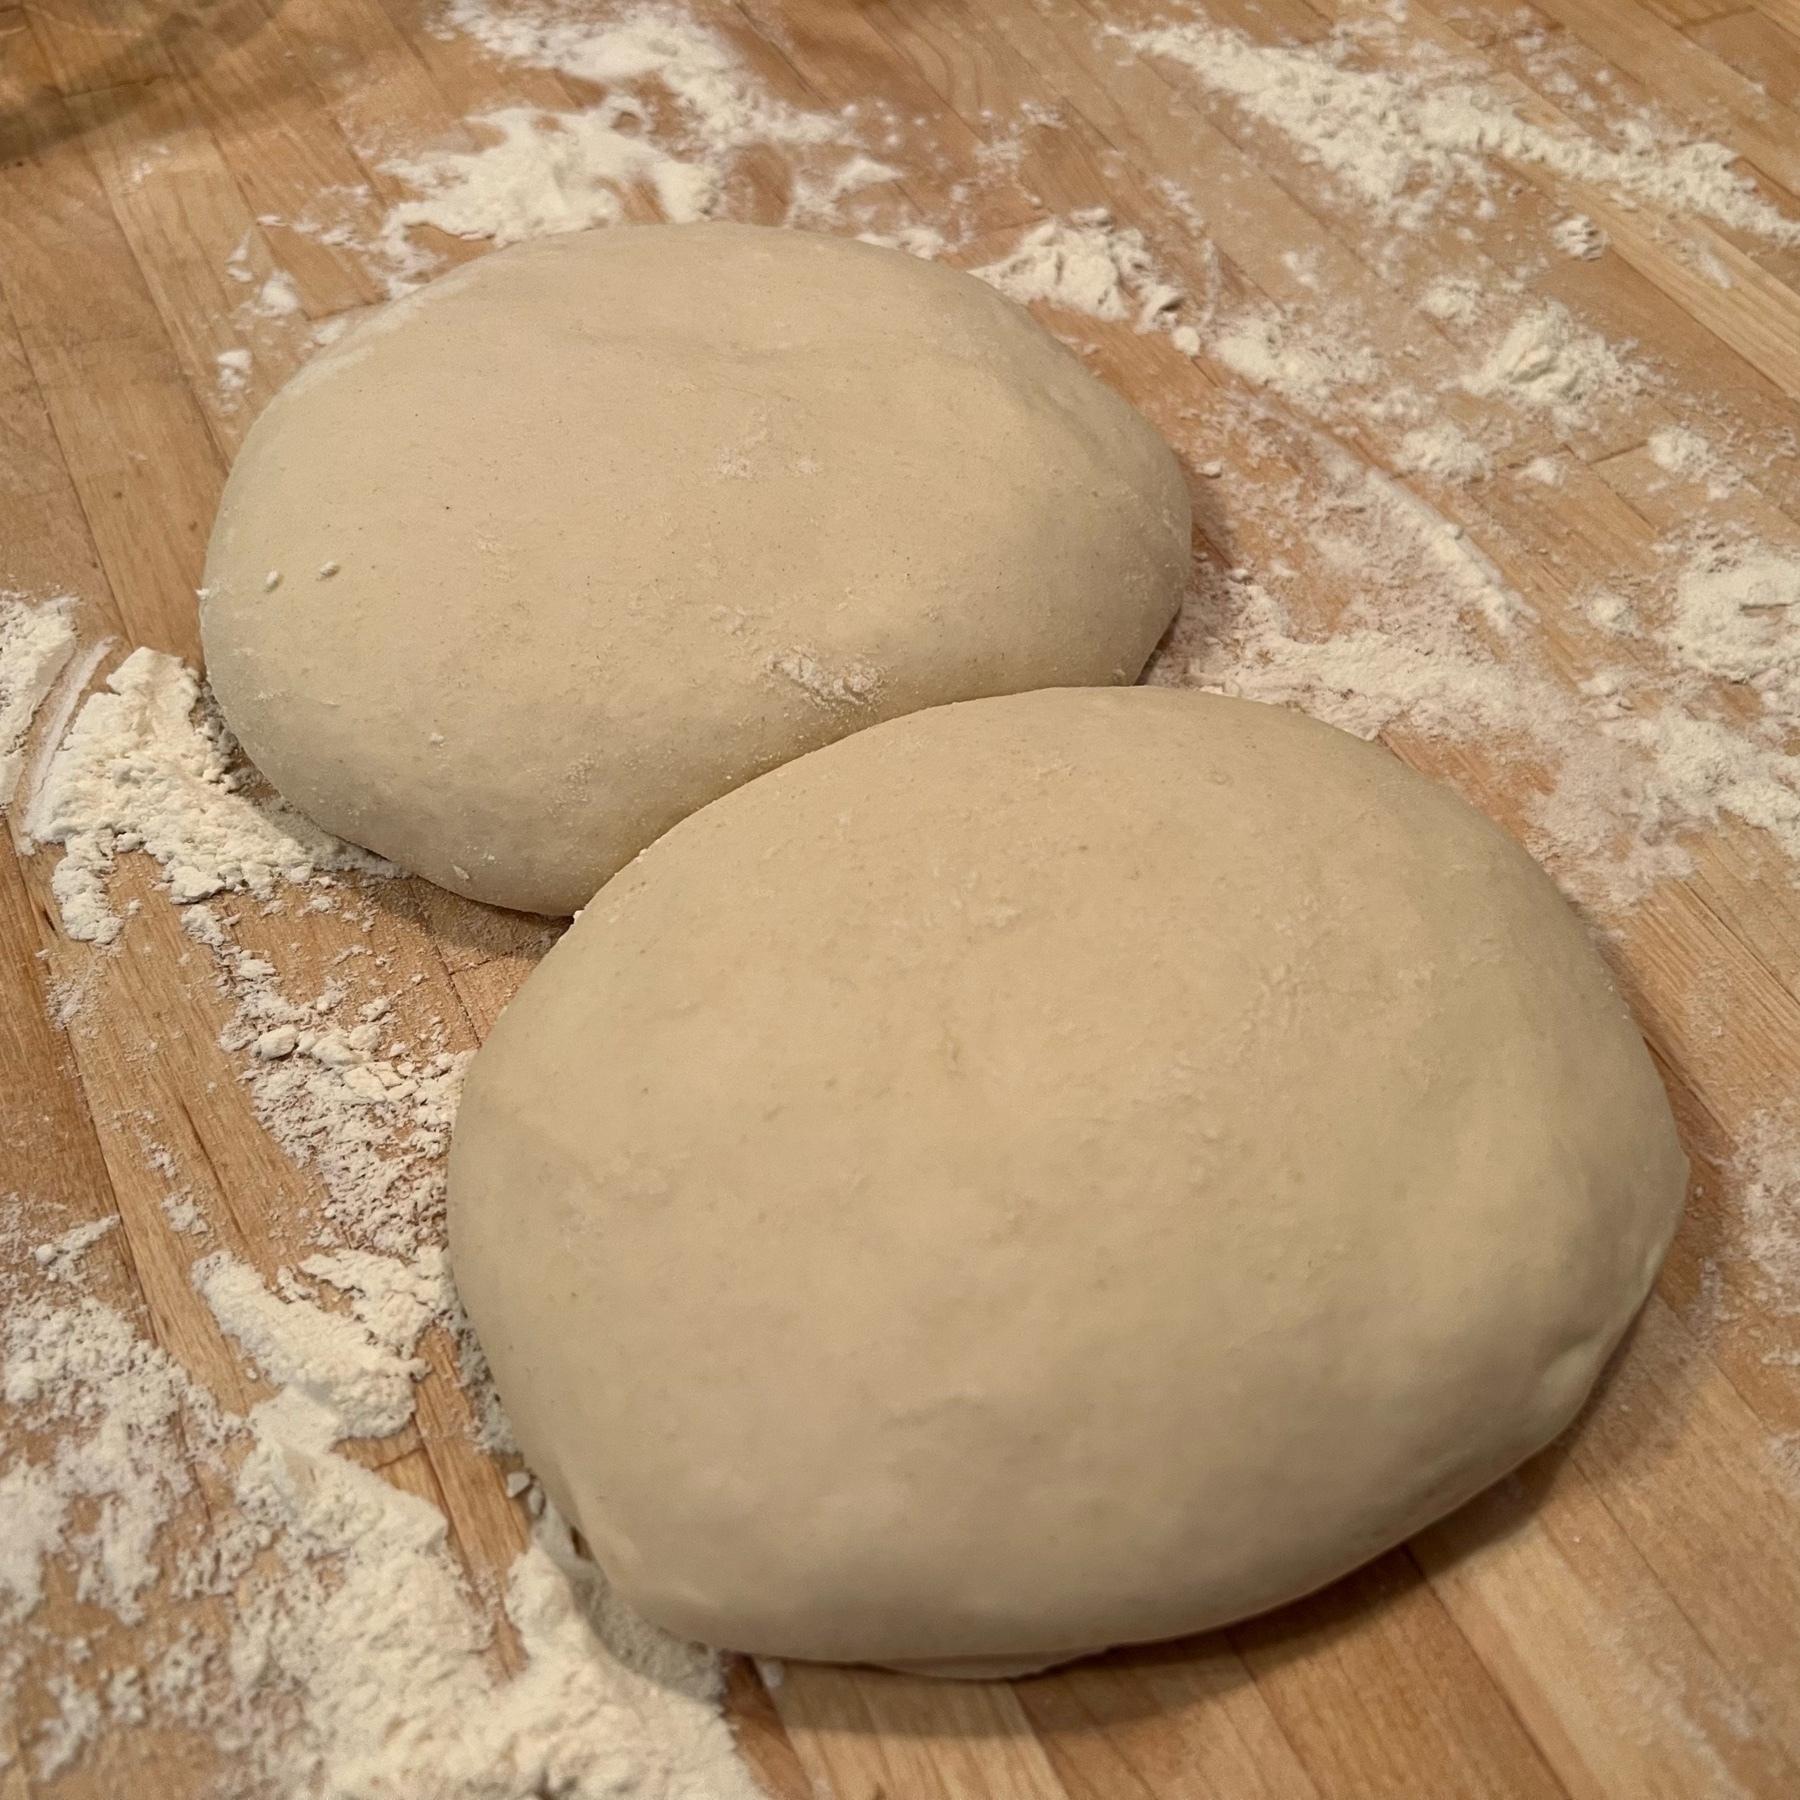 two pre-shaped balls of pizza dough on a wood counter with flour all around